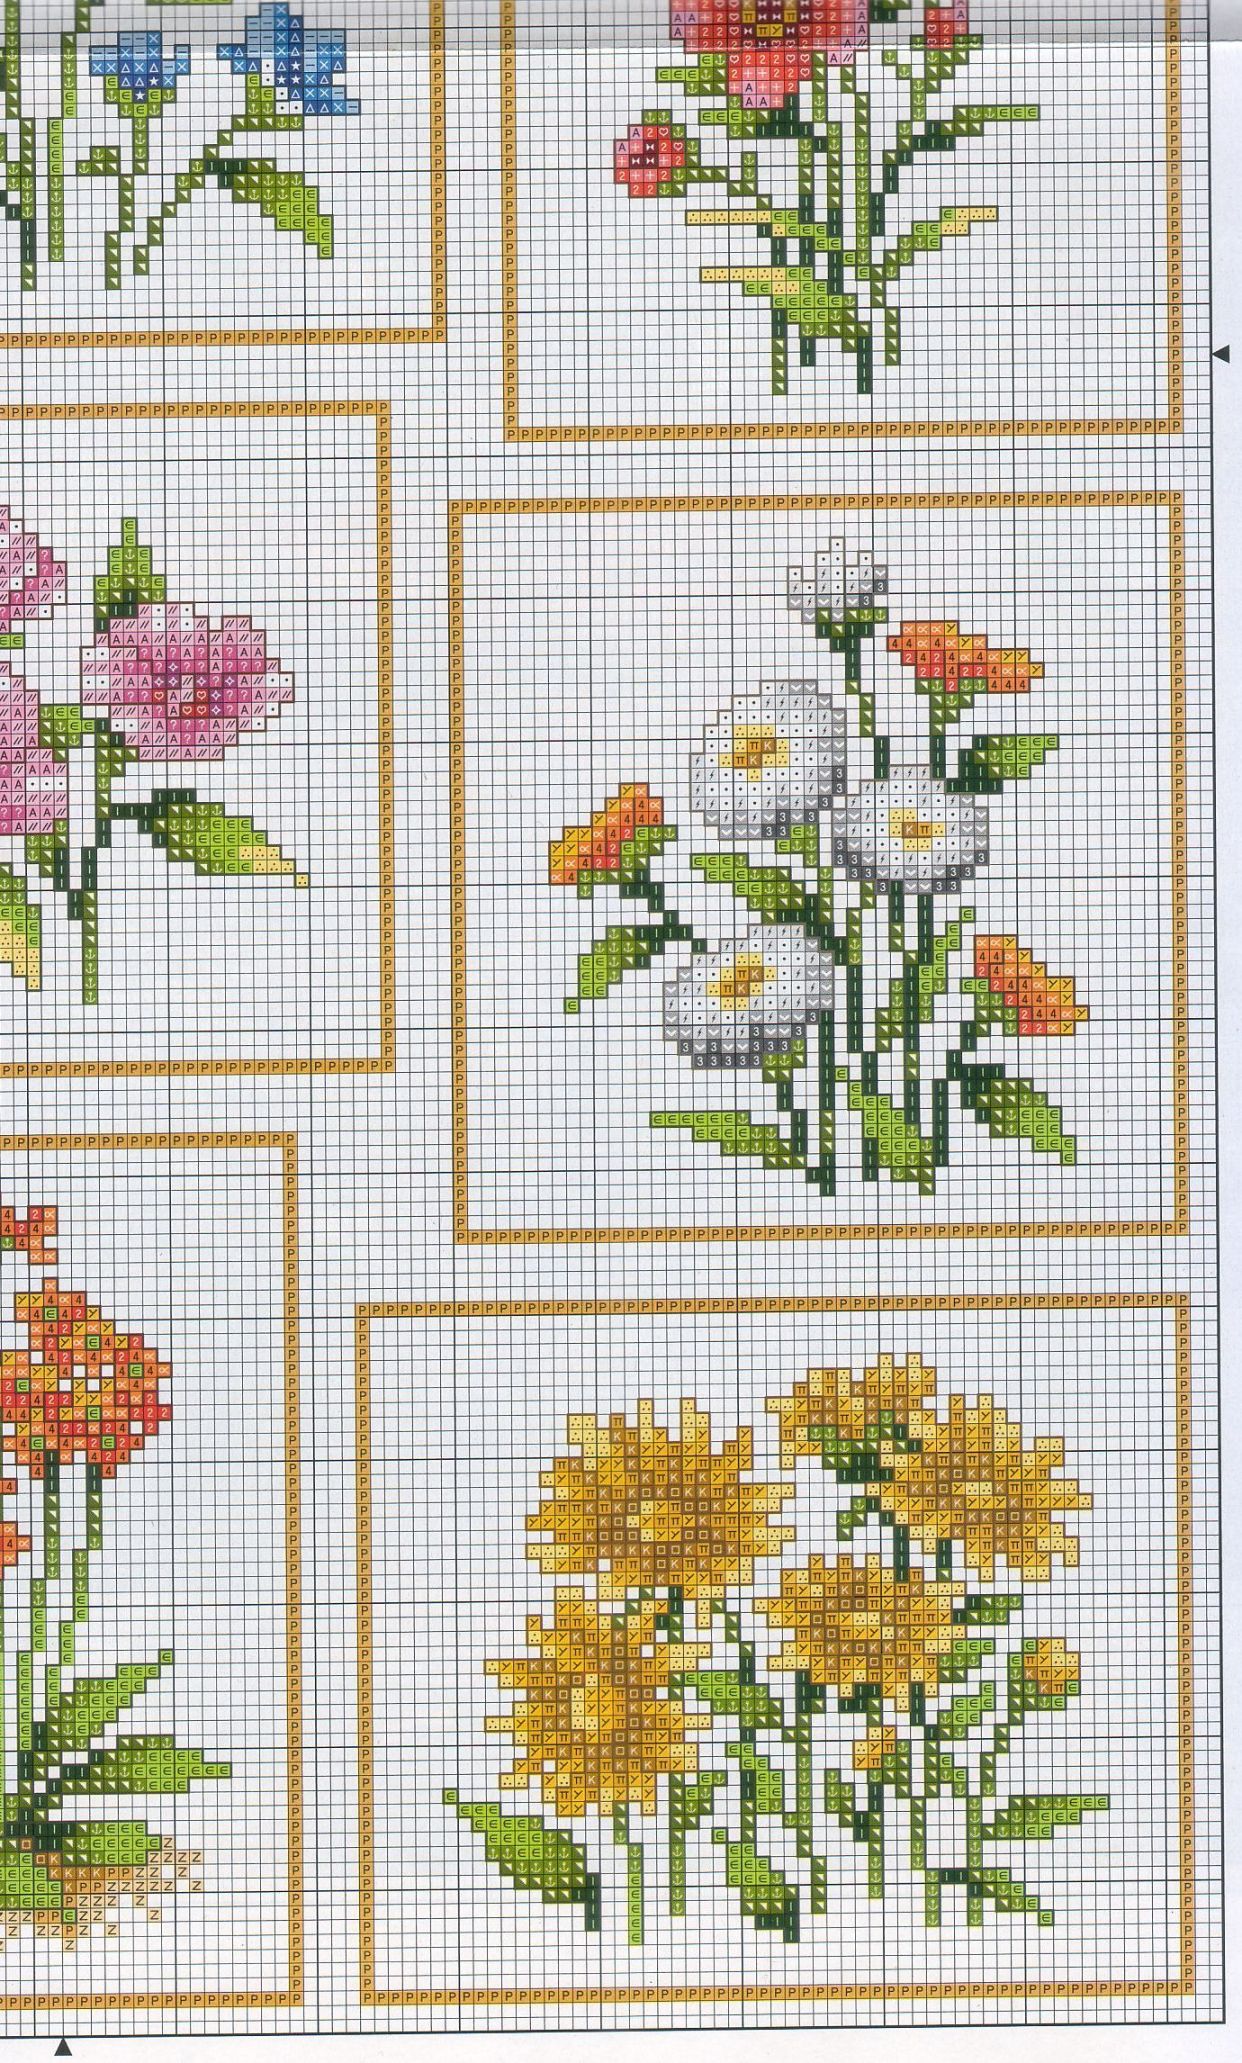 Various mixed flowers free cross stitch patterns (3)